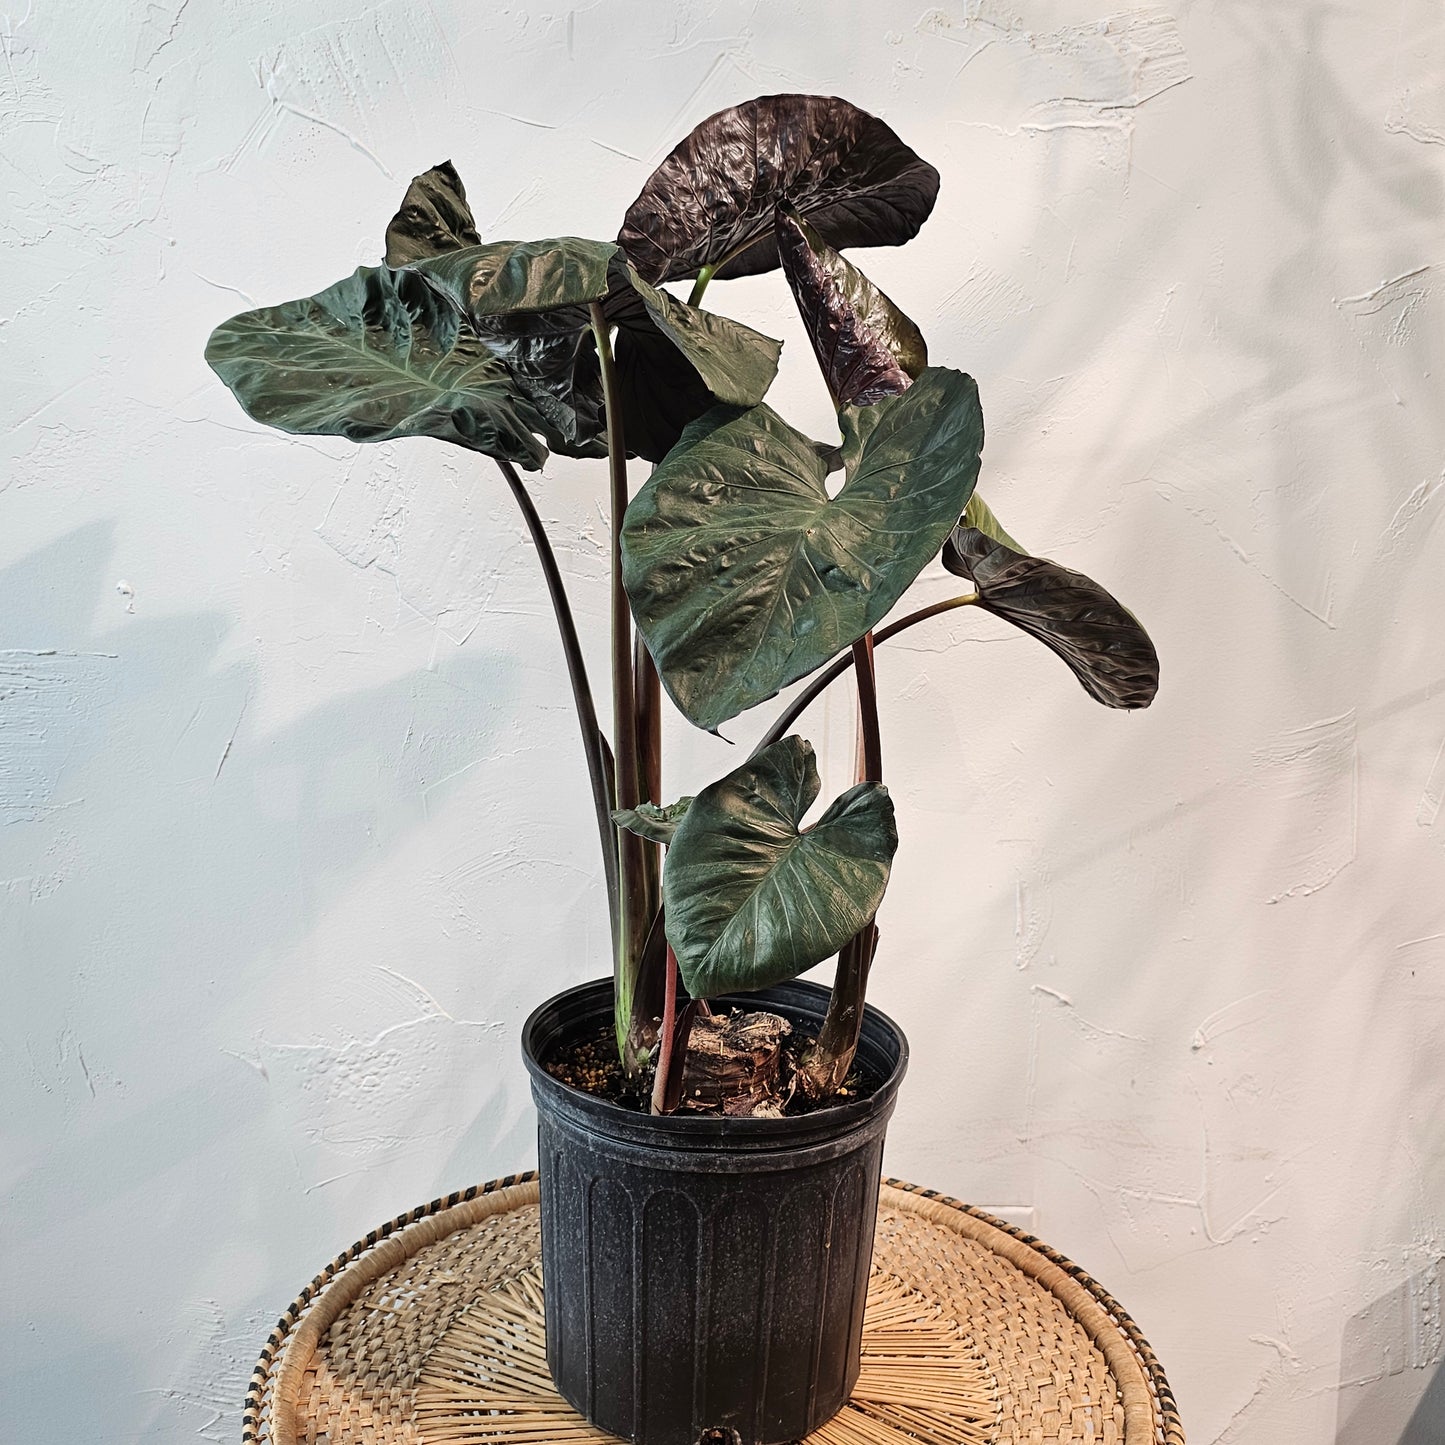 Elephant Ear, Taro (Alocasia odora) in a 10 inch pot. Indoor plant for sale by Promise Supply for delivery and pickup in Toronto